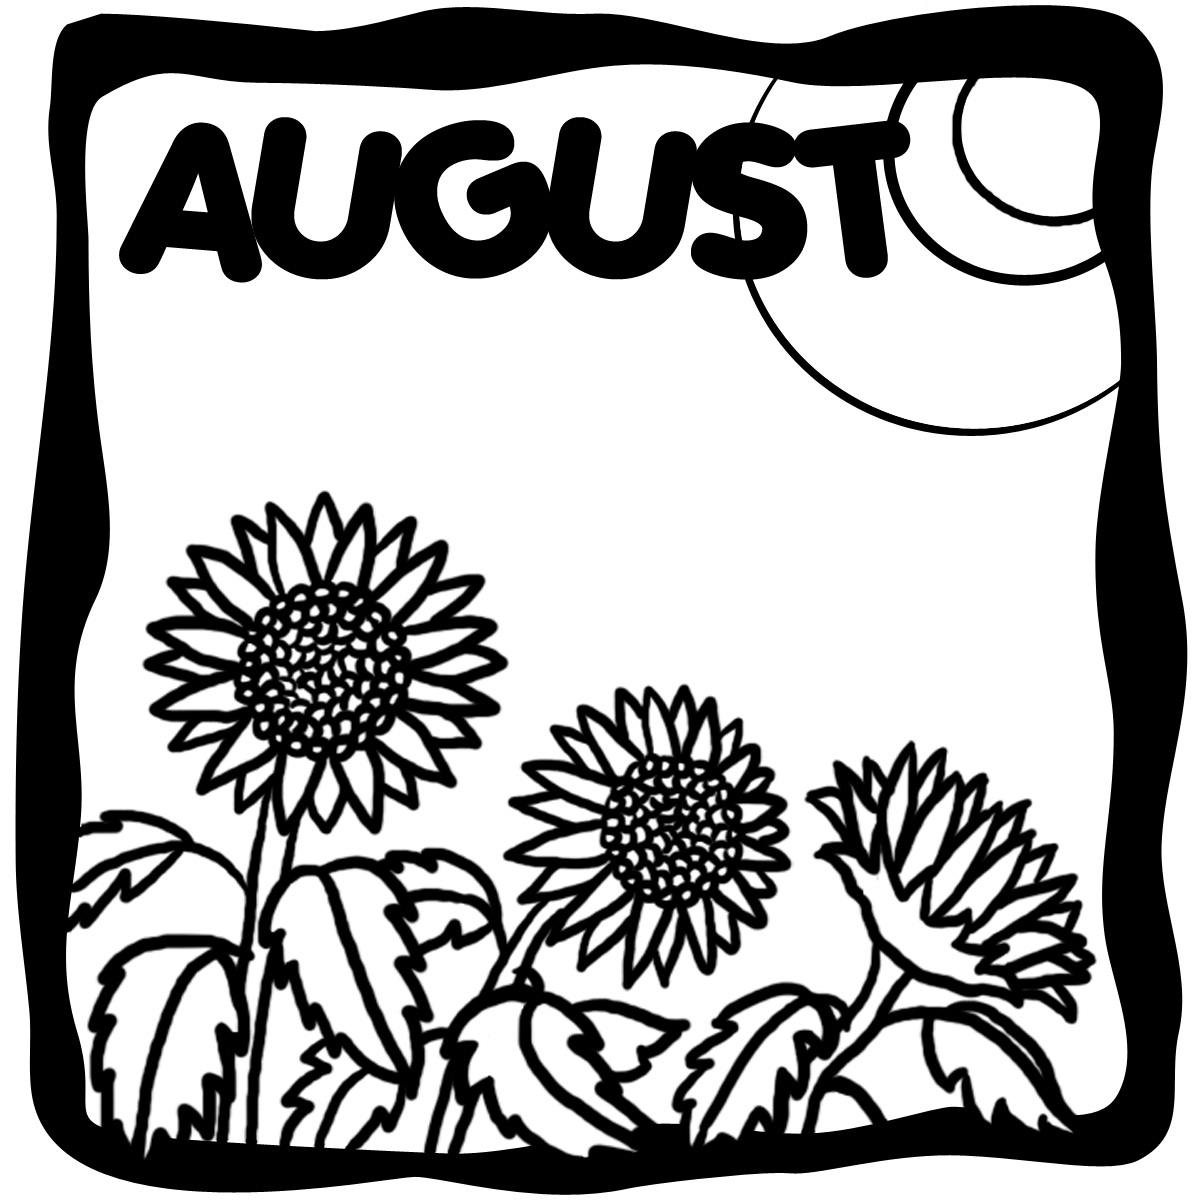 August 20clipart | Clipart Panda - Free Clipart Images